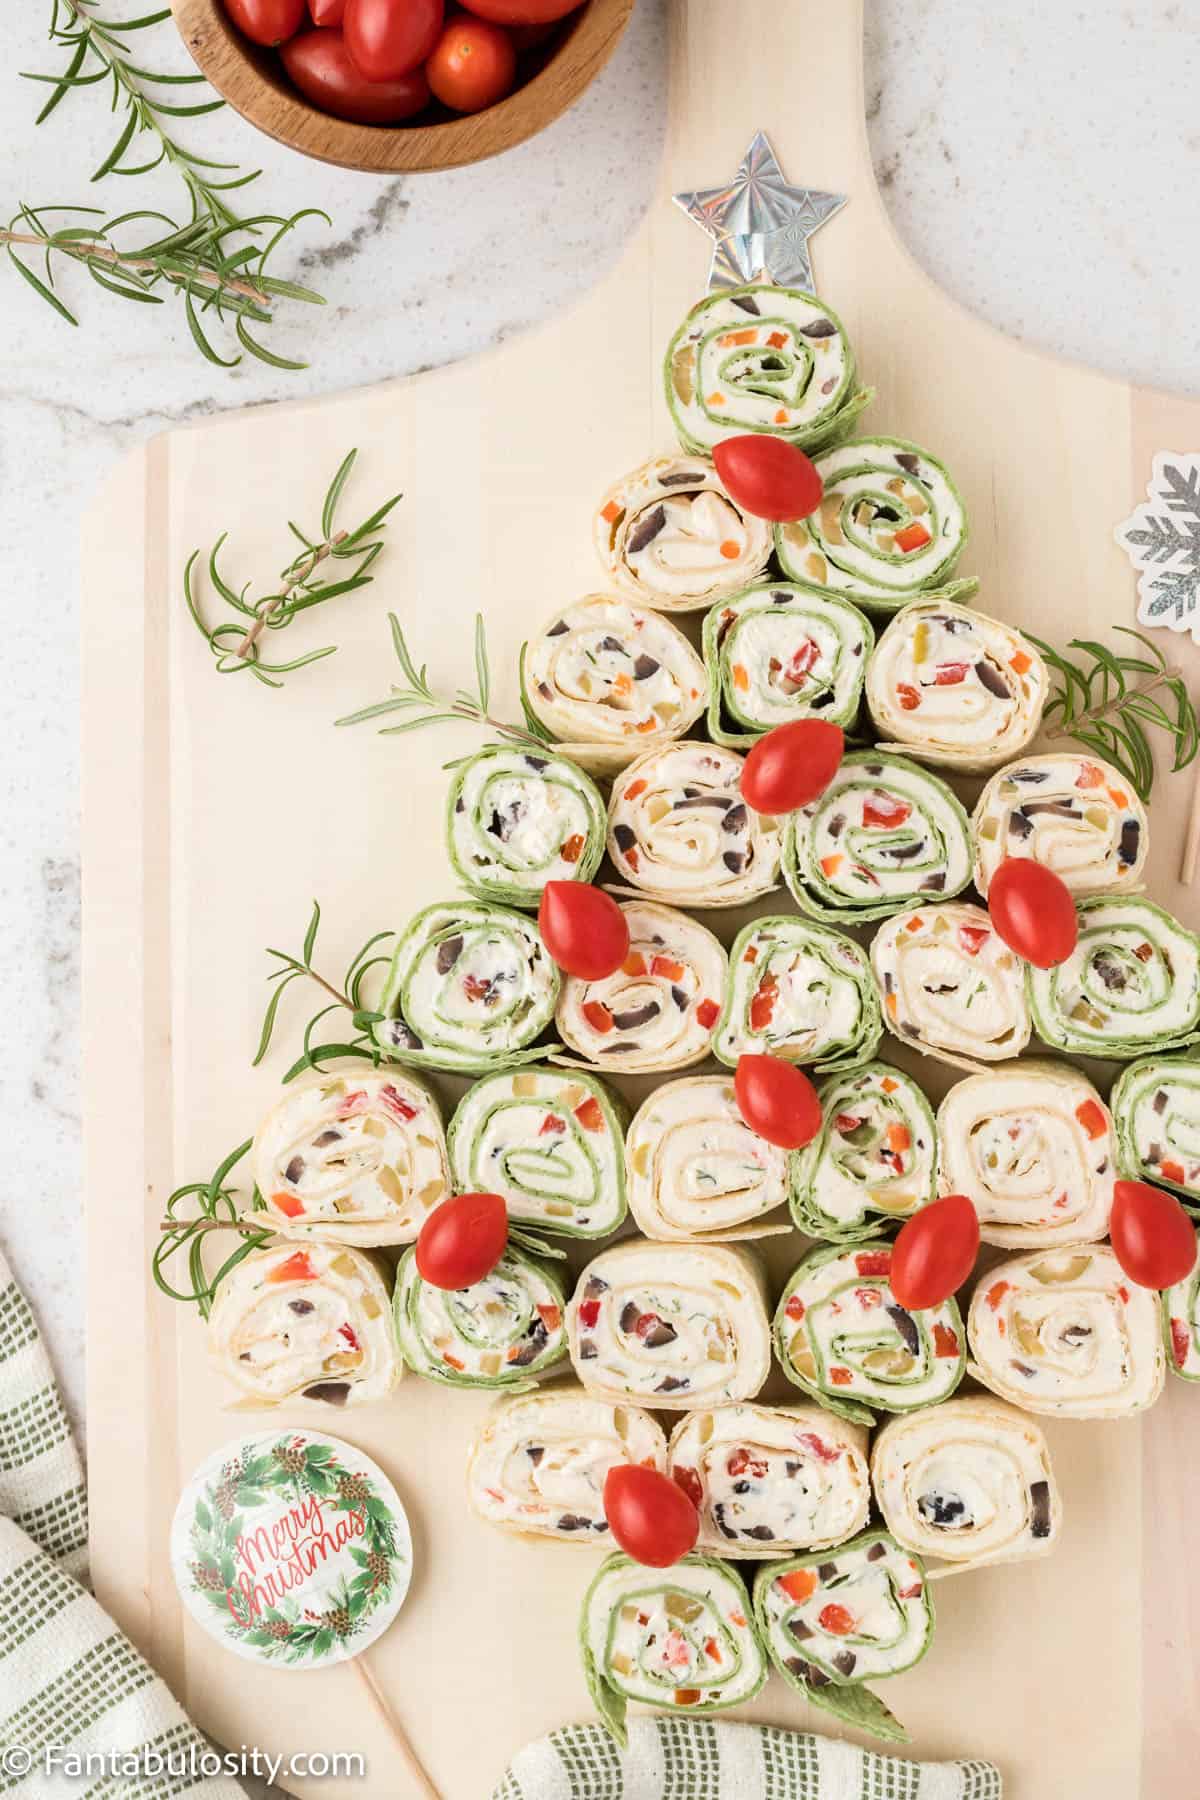 Slices of a rolled tortilla pinwheel are arranged to look like a Christmas tree, cherry tomatoes are placed to look like ornaments and there are decorative holiday picks for serving